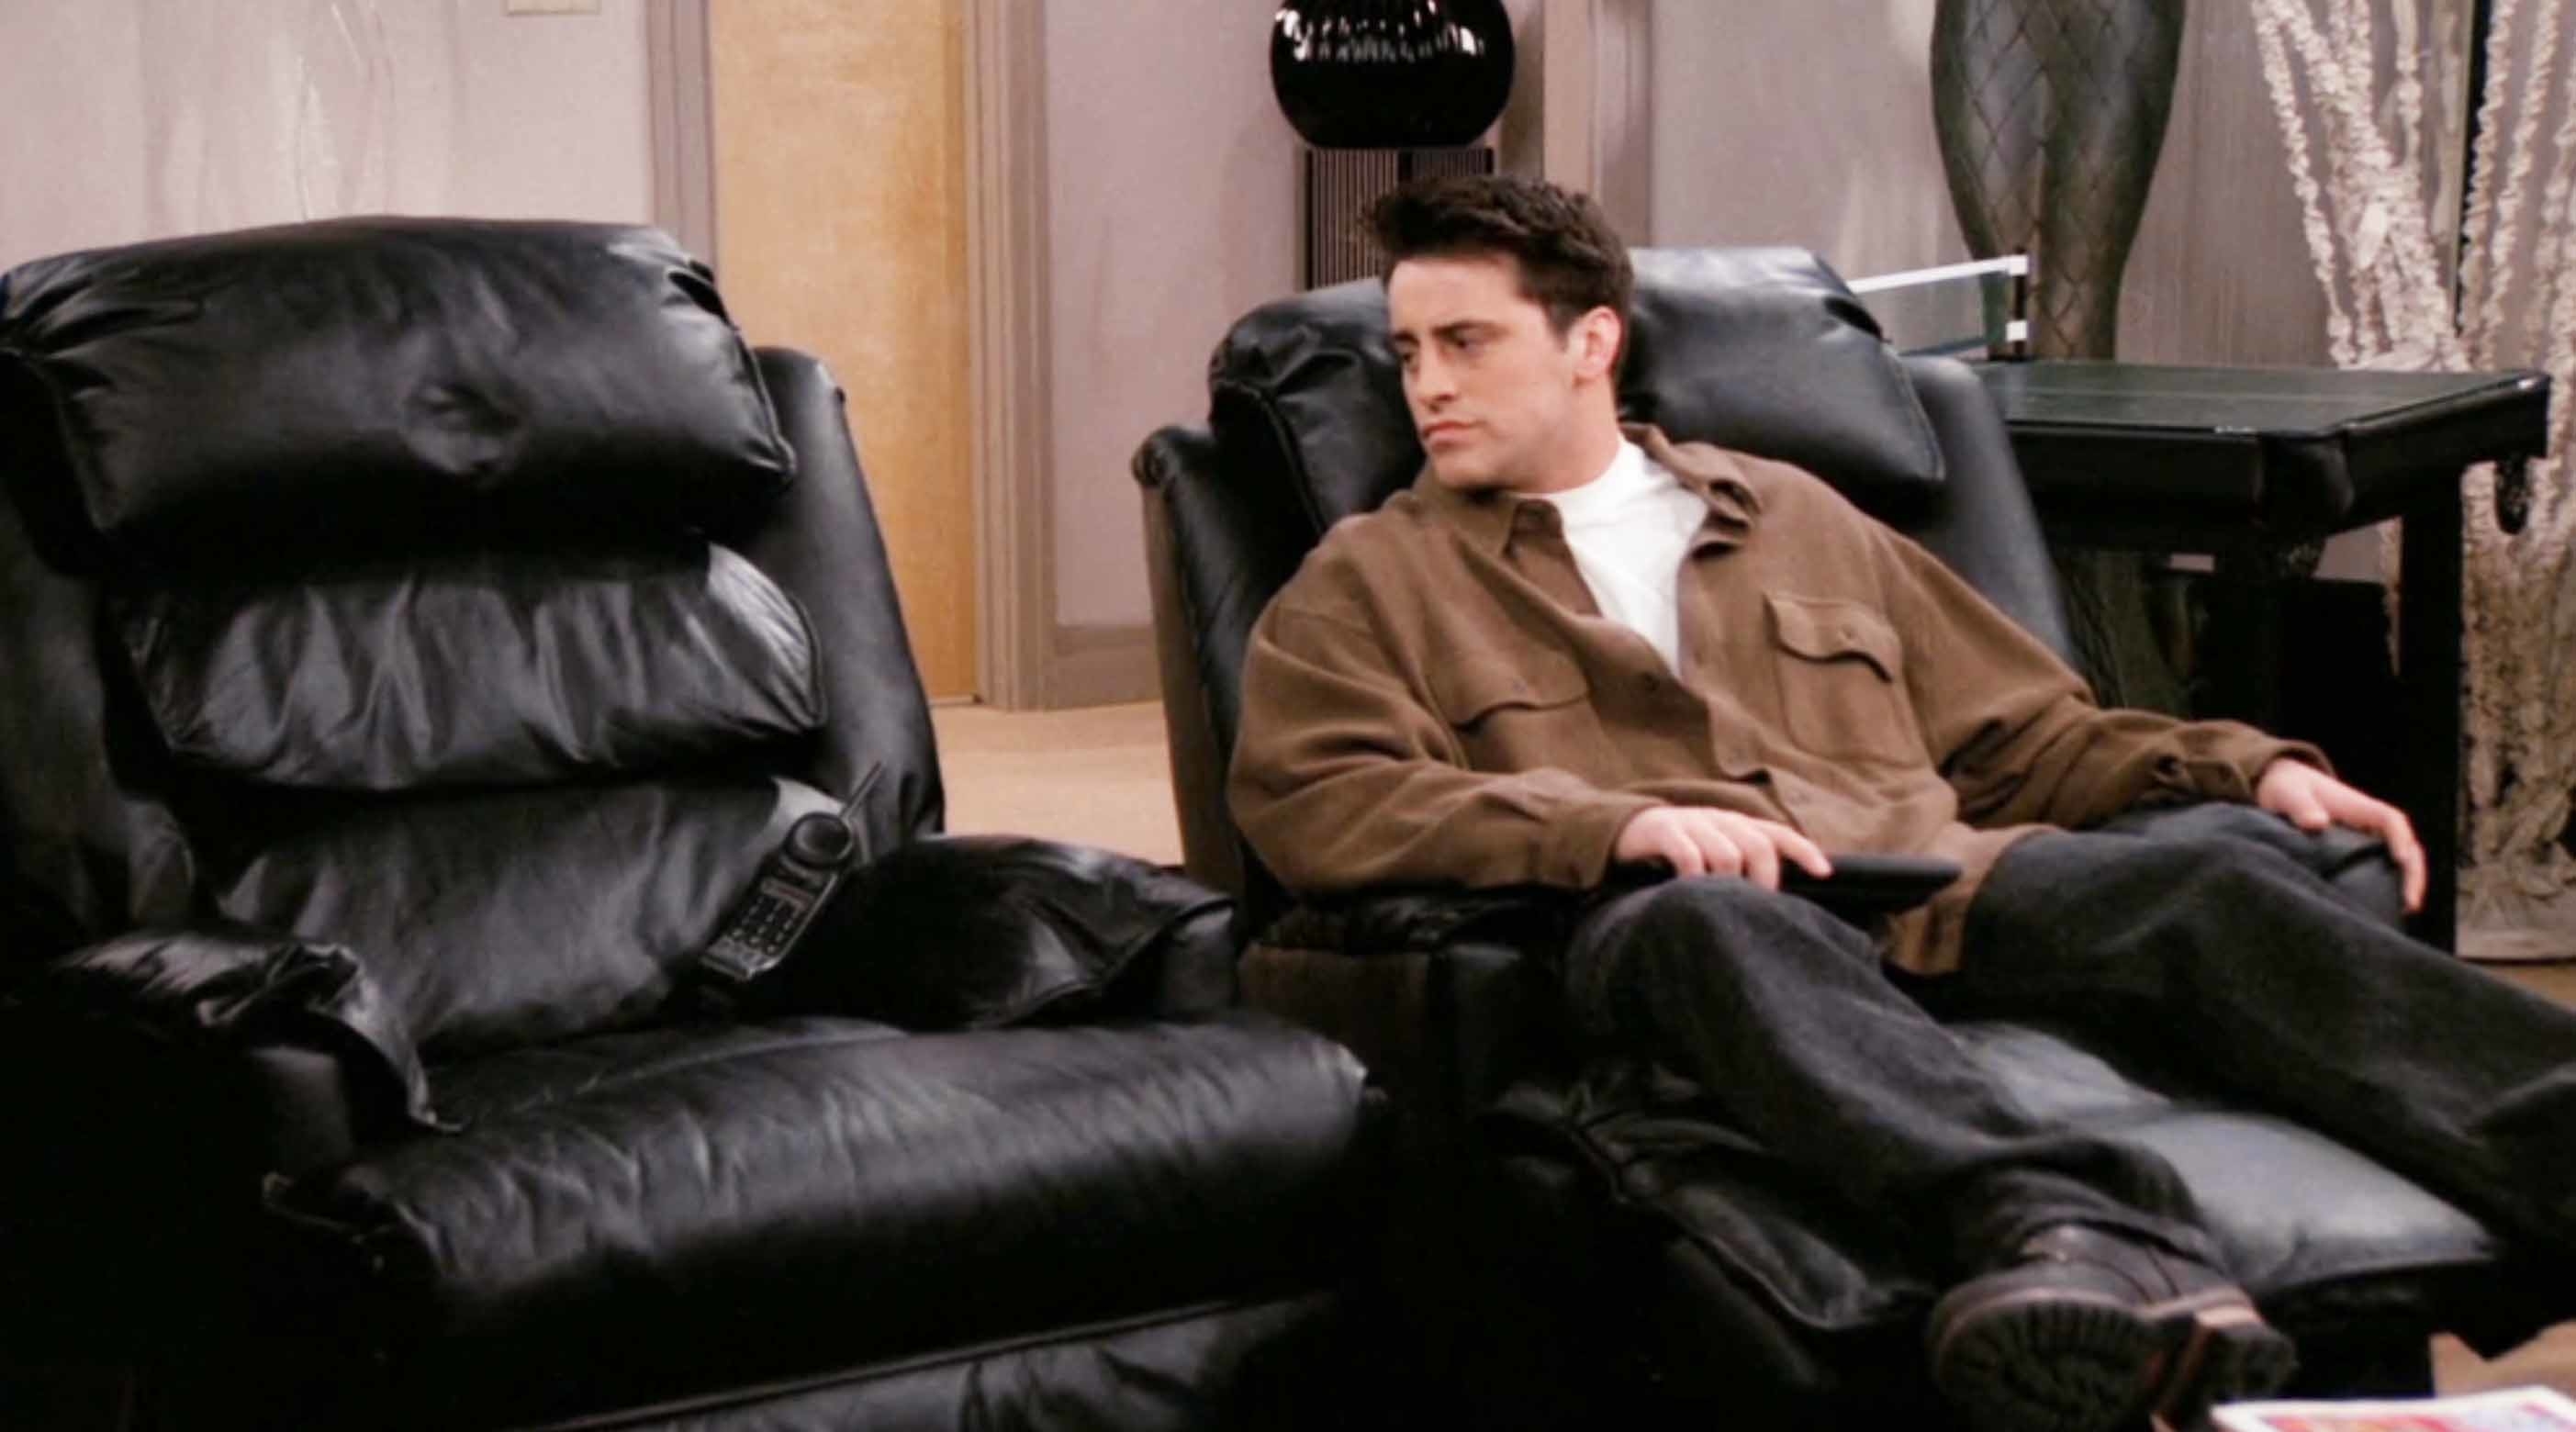 Matt on the show looking at an empty reclining chair next to his